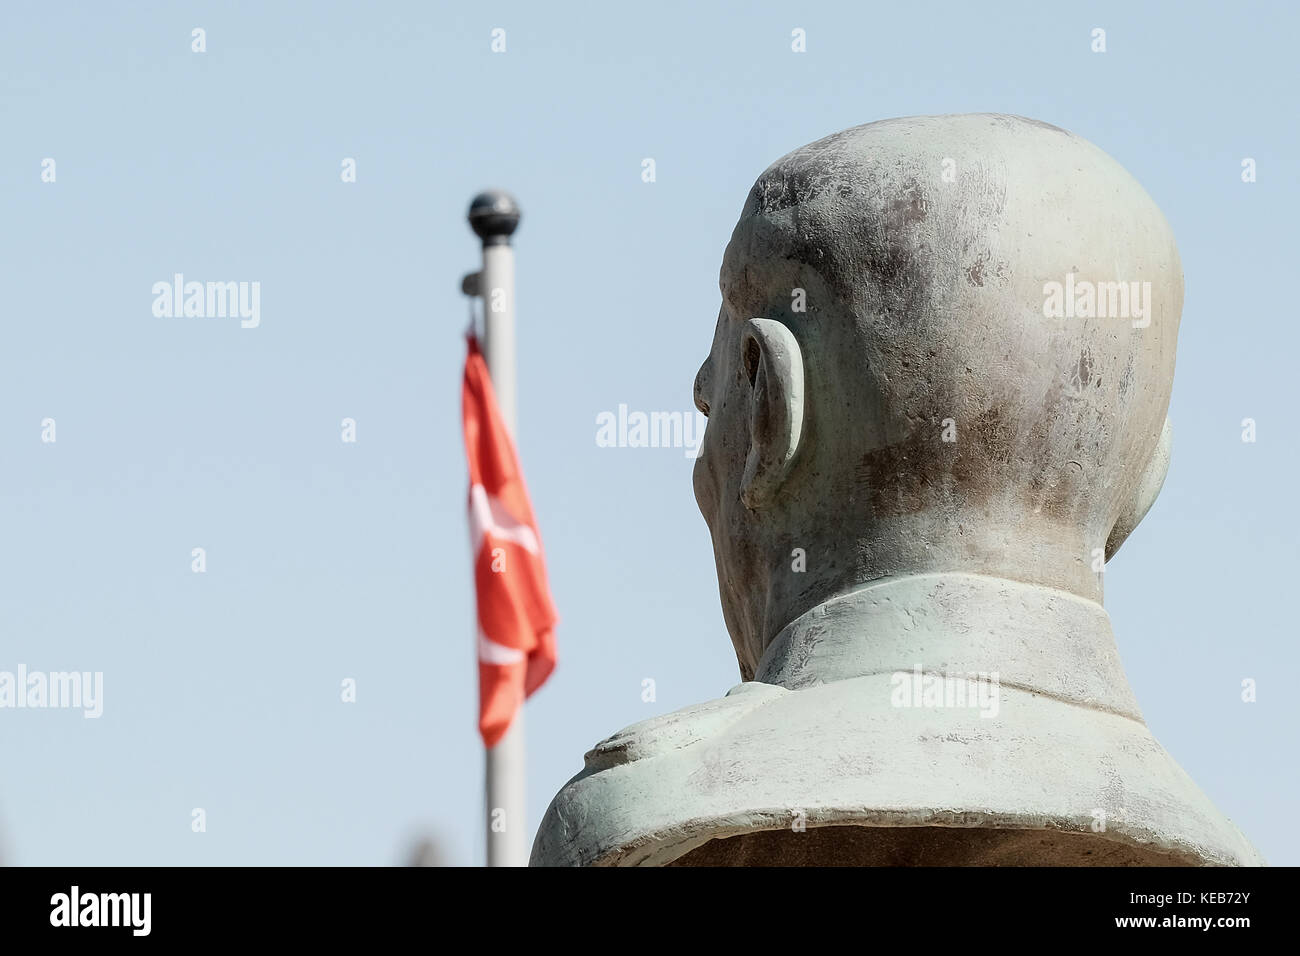 A bust statue of Mustafa Kemal Ataturk, founder of the Turkish Republic, serves the Turkish Soldiers' Memorial Monument,, erected in October 2002, hon Stock Photo